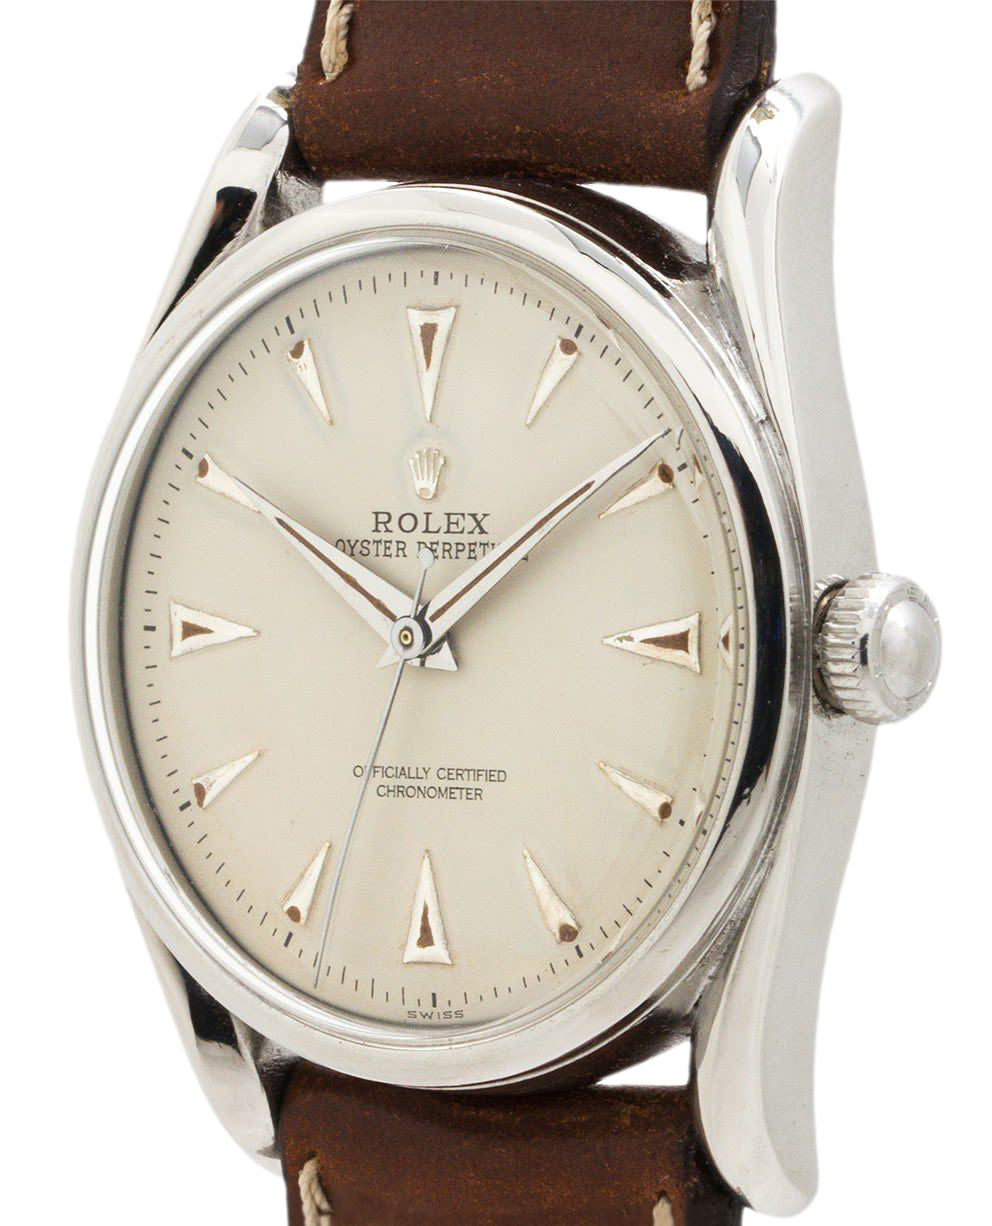 Rolex Bombe, Oyster Perpetual 5018 4